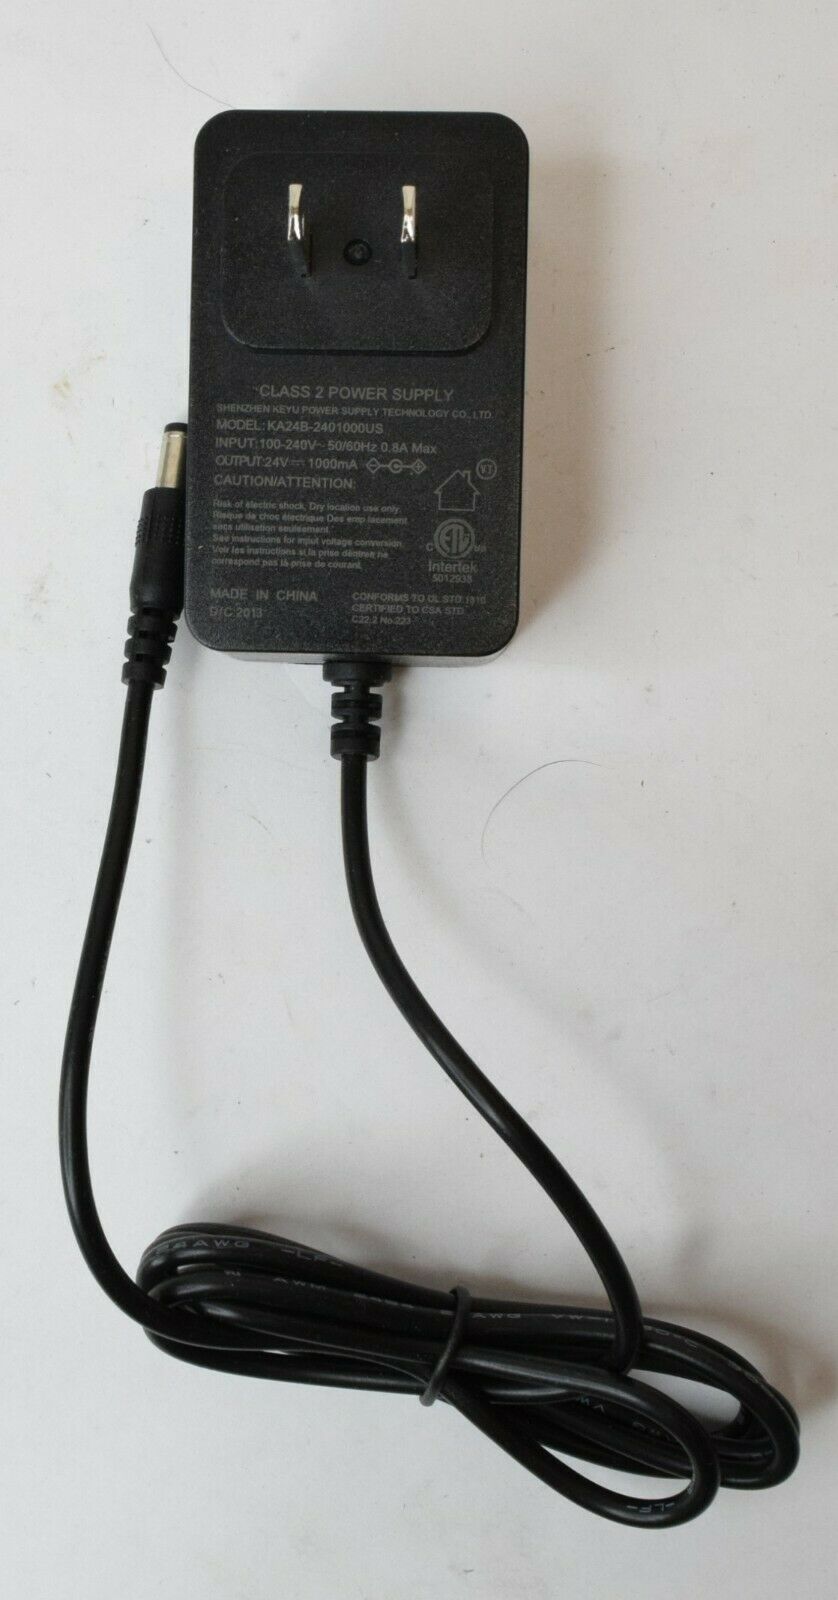 Shenzhen Keyu Power Supply Tech Class 2 Adapter KA24B-2401000US 24V 1000mA Type: Adapter Output Voltage: 24 V Features: - Click Image to Close